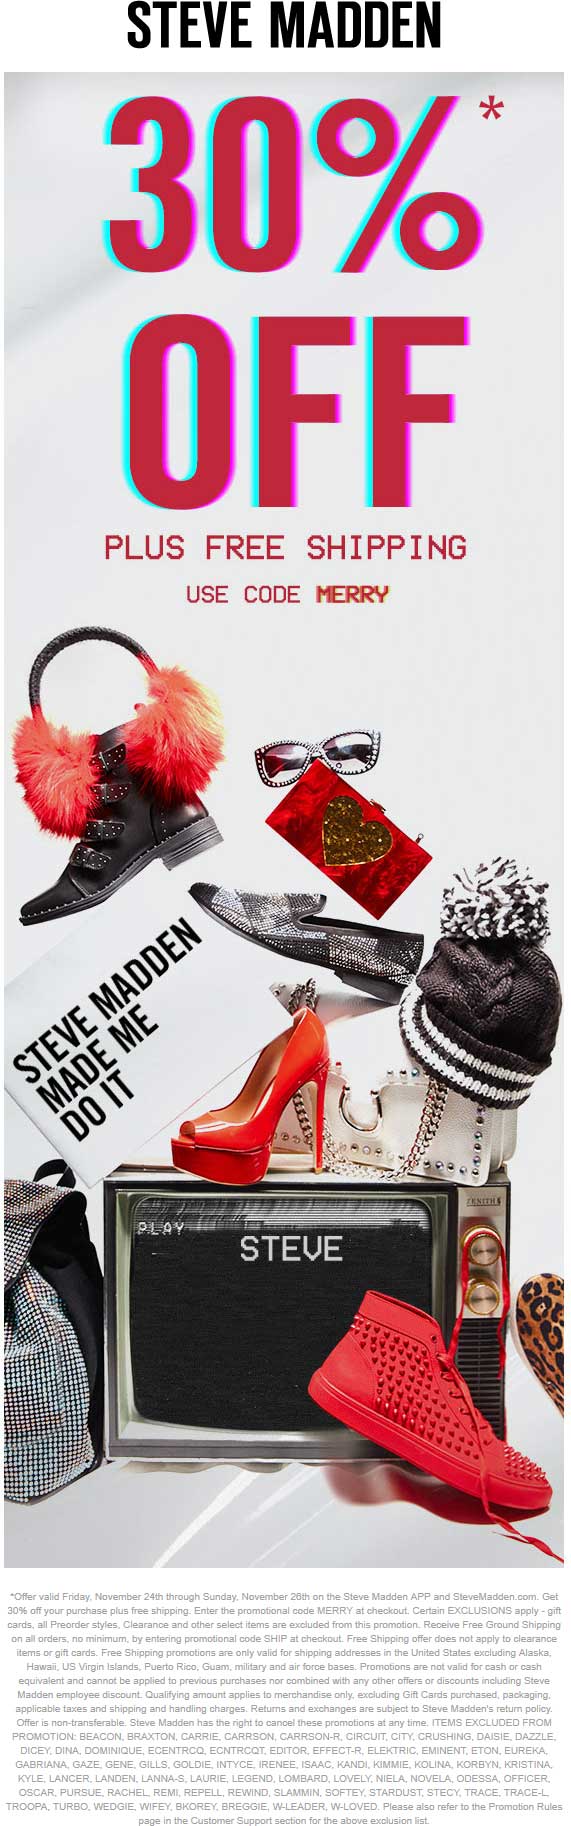 Steve Madden Coupon March 2024 30% off online + free ship at Steve Madden via promo code MERRY